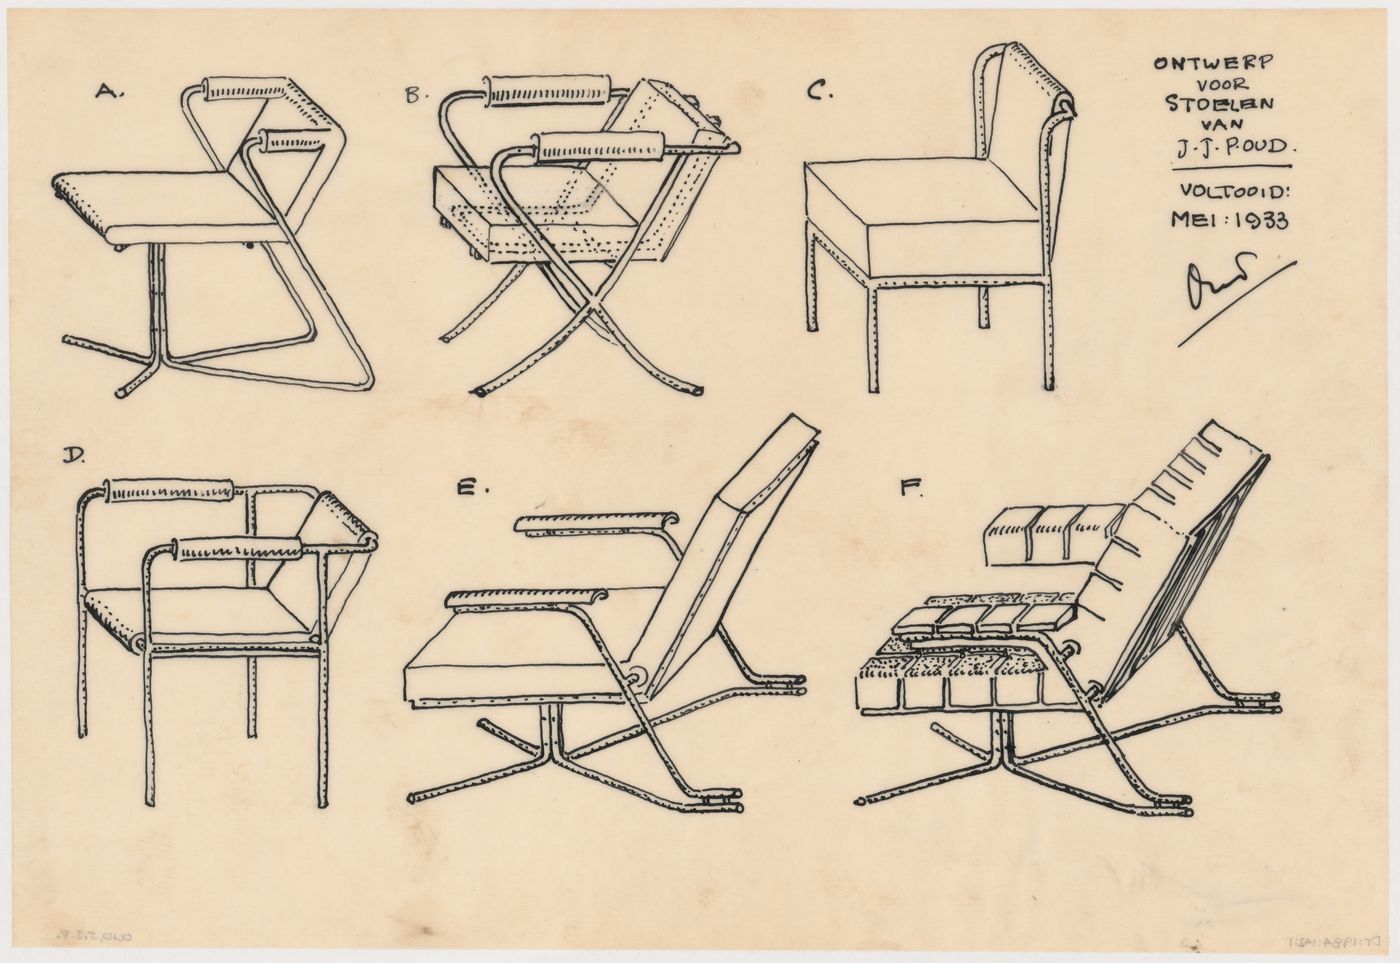 Perspectives for chair designs for Metz. & Co., Amsterdam, Netherlands